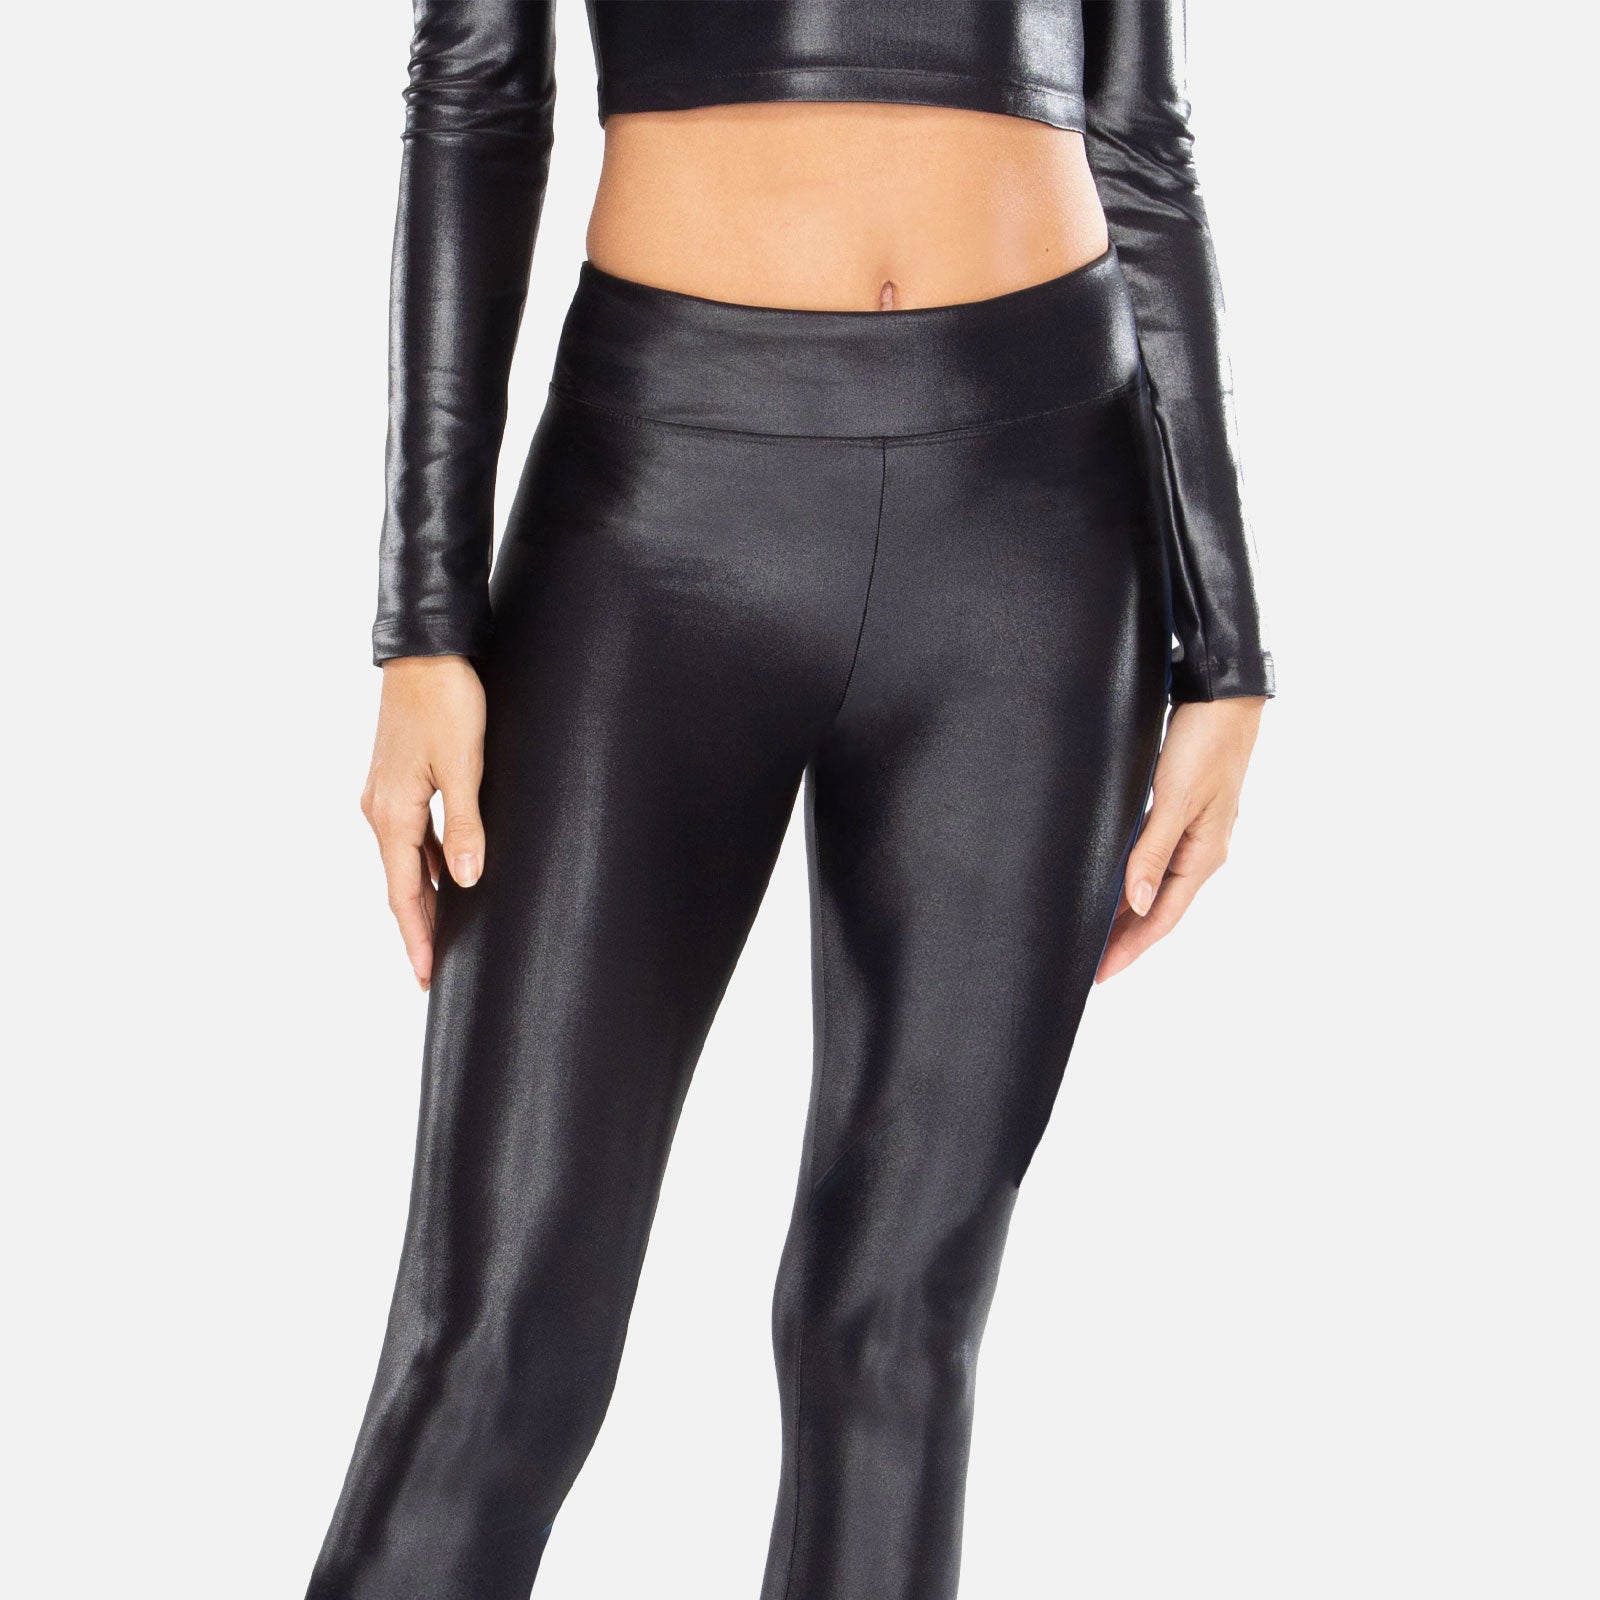 Lustrous Infinity HR Legging - Tracy Anderson